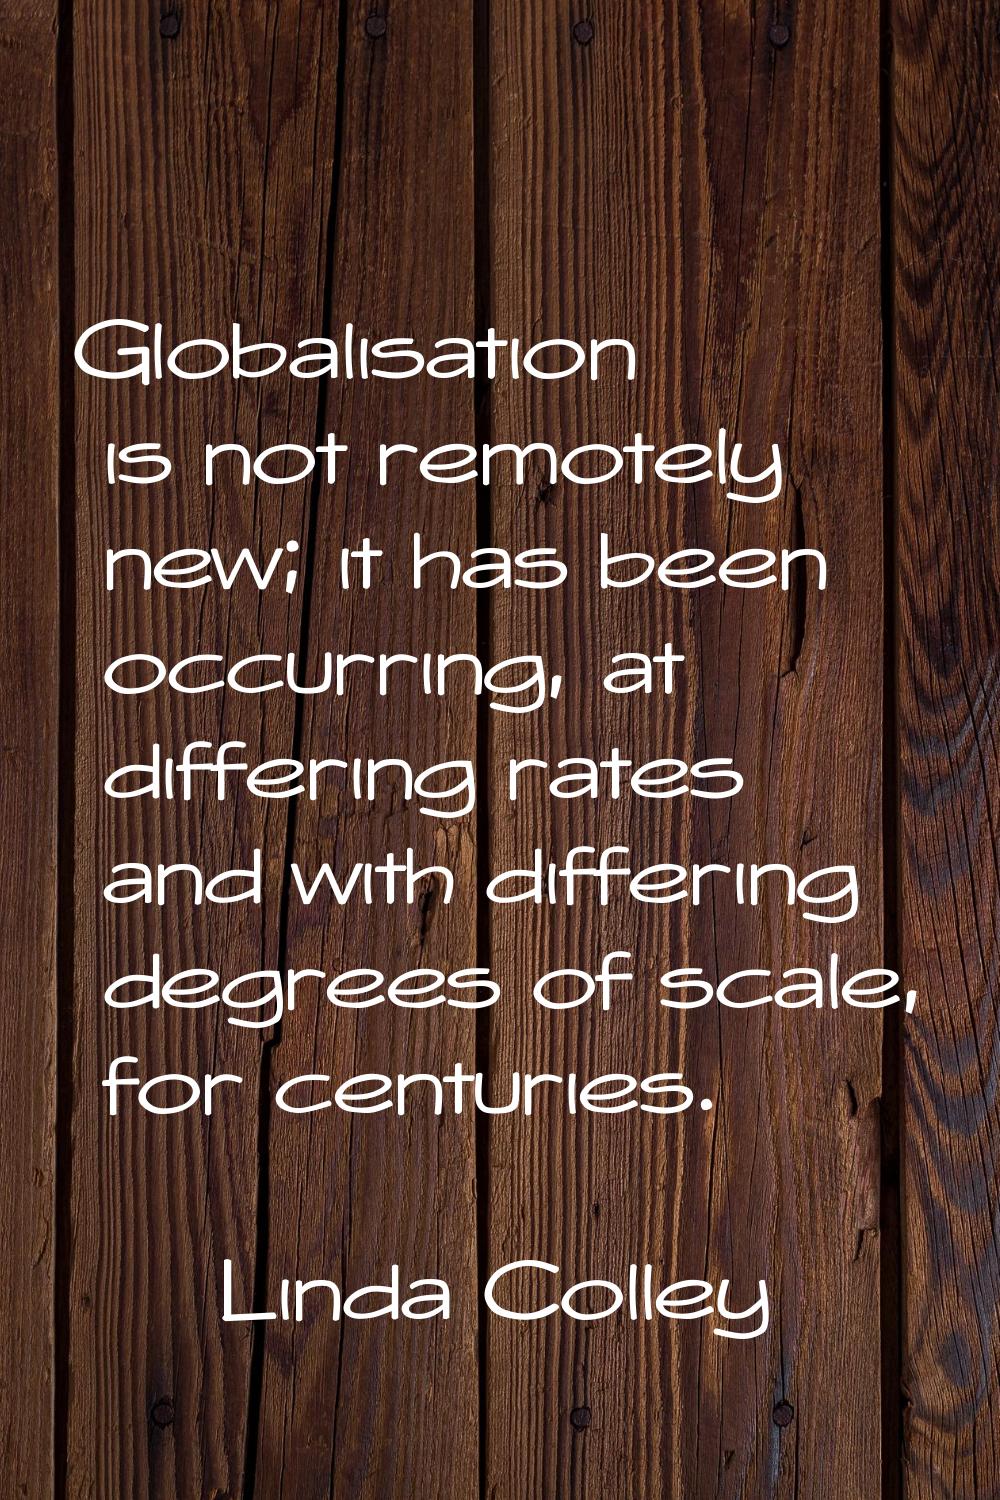 Globalisation is not remotely new; it has been occurring, at differing rates and with differing deg